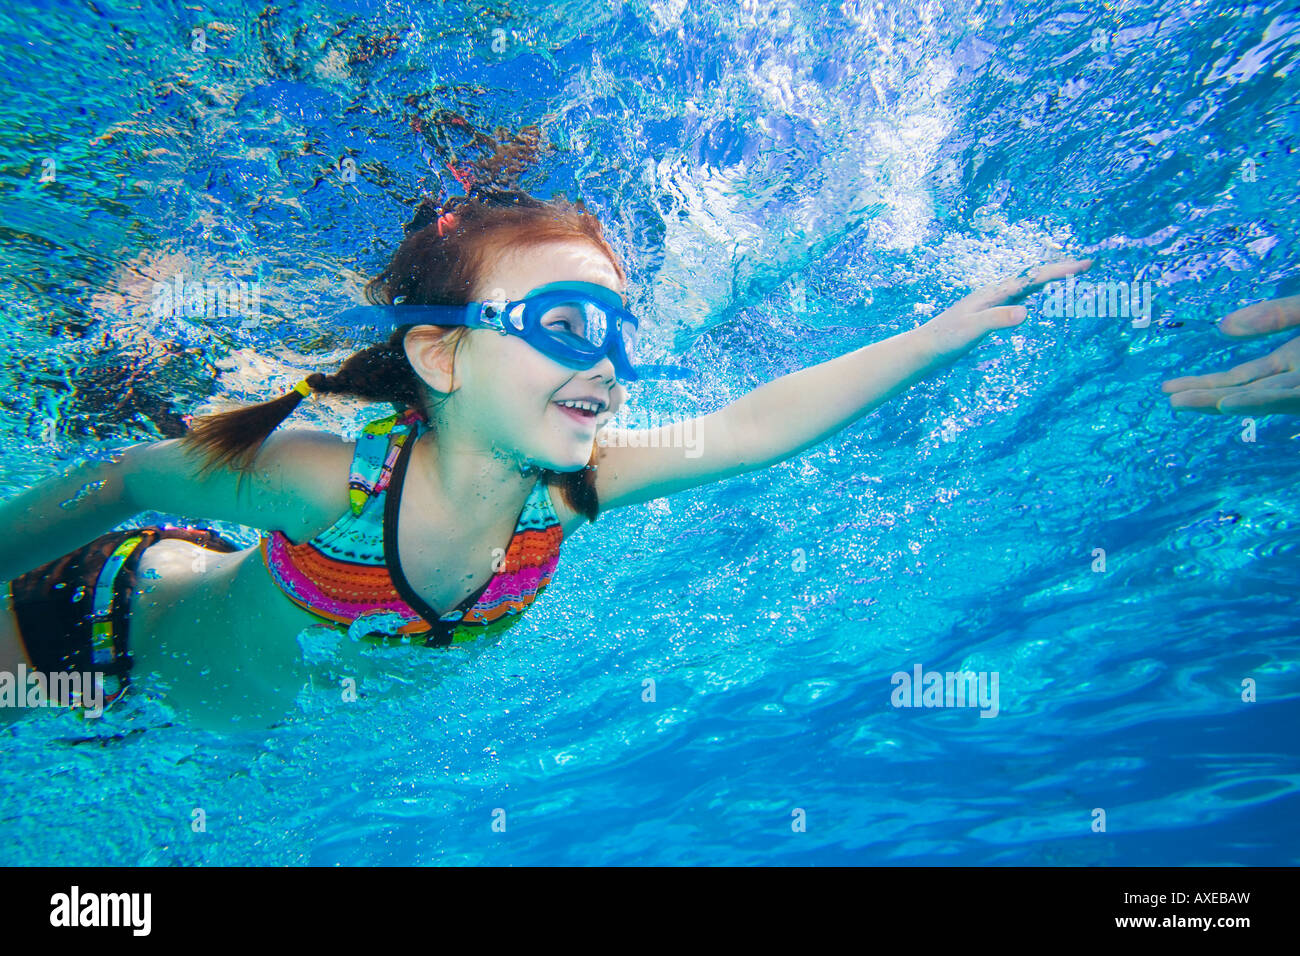 Underwater Asian girl swimming Banque D'Images